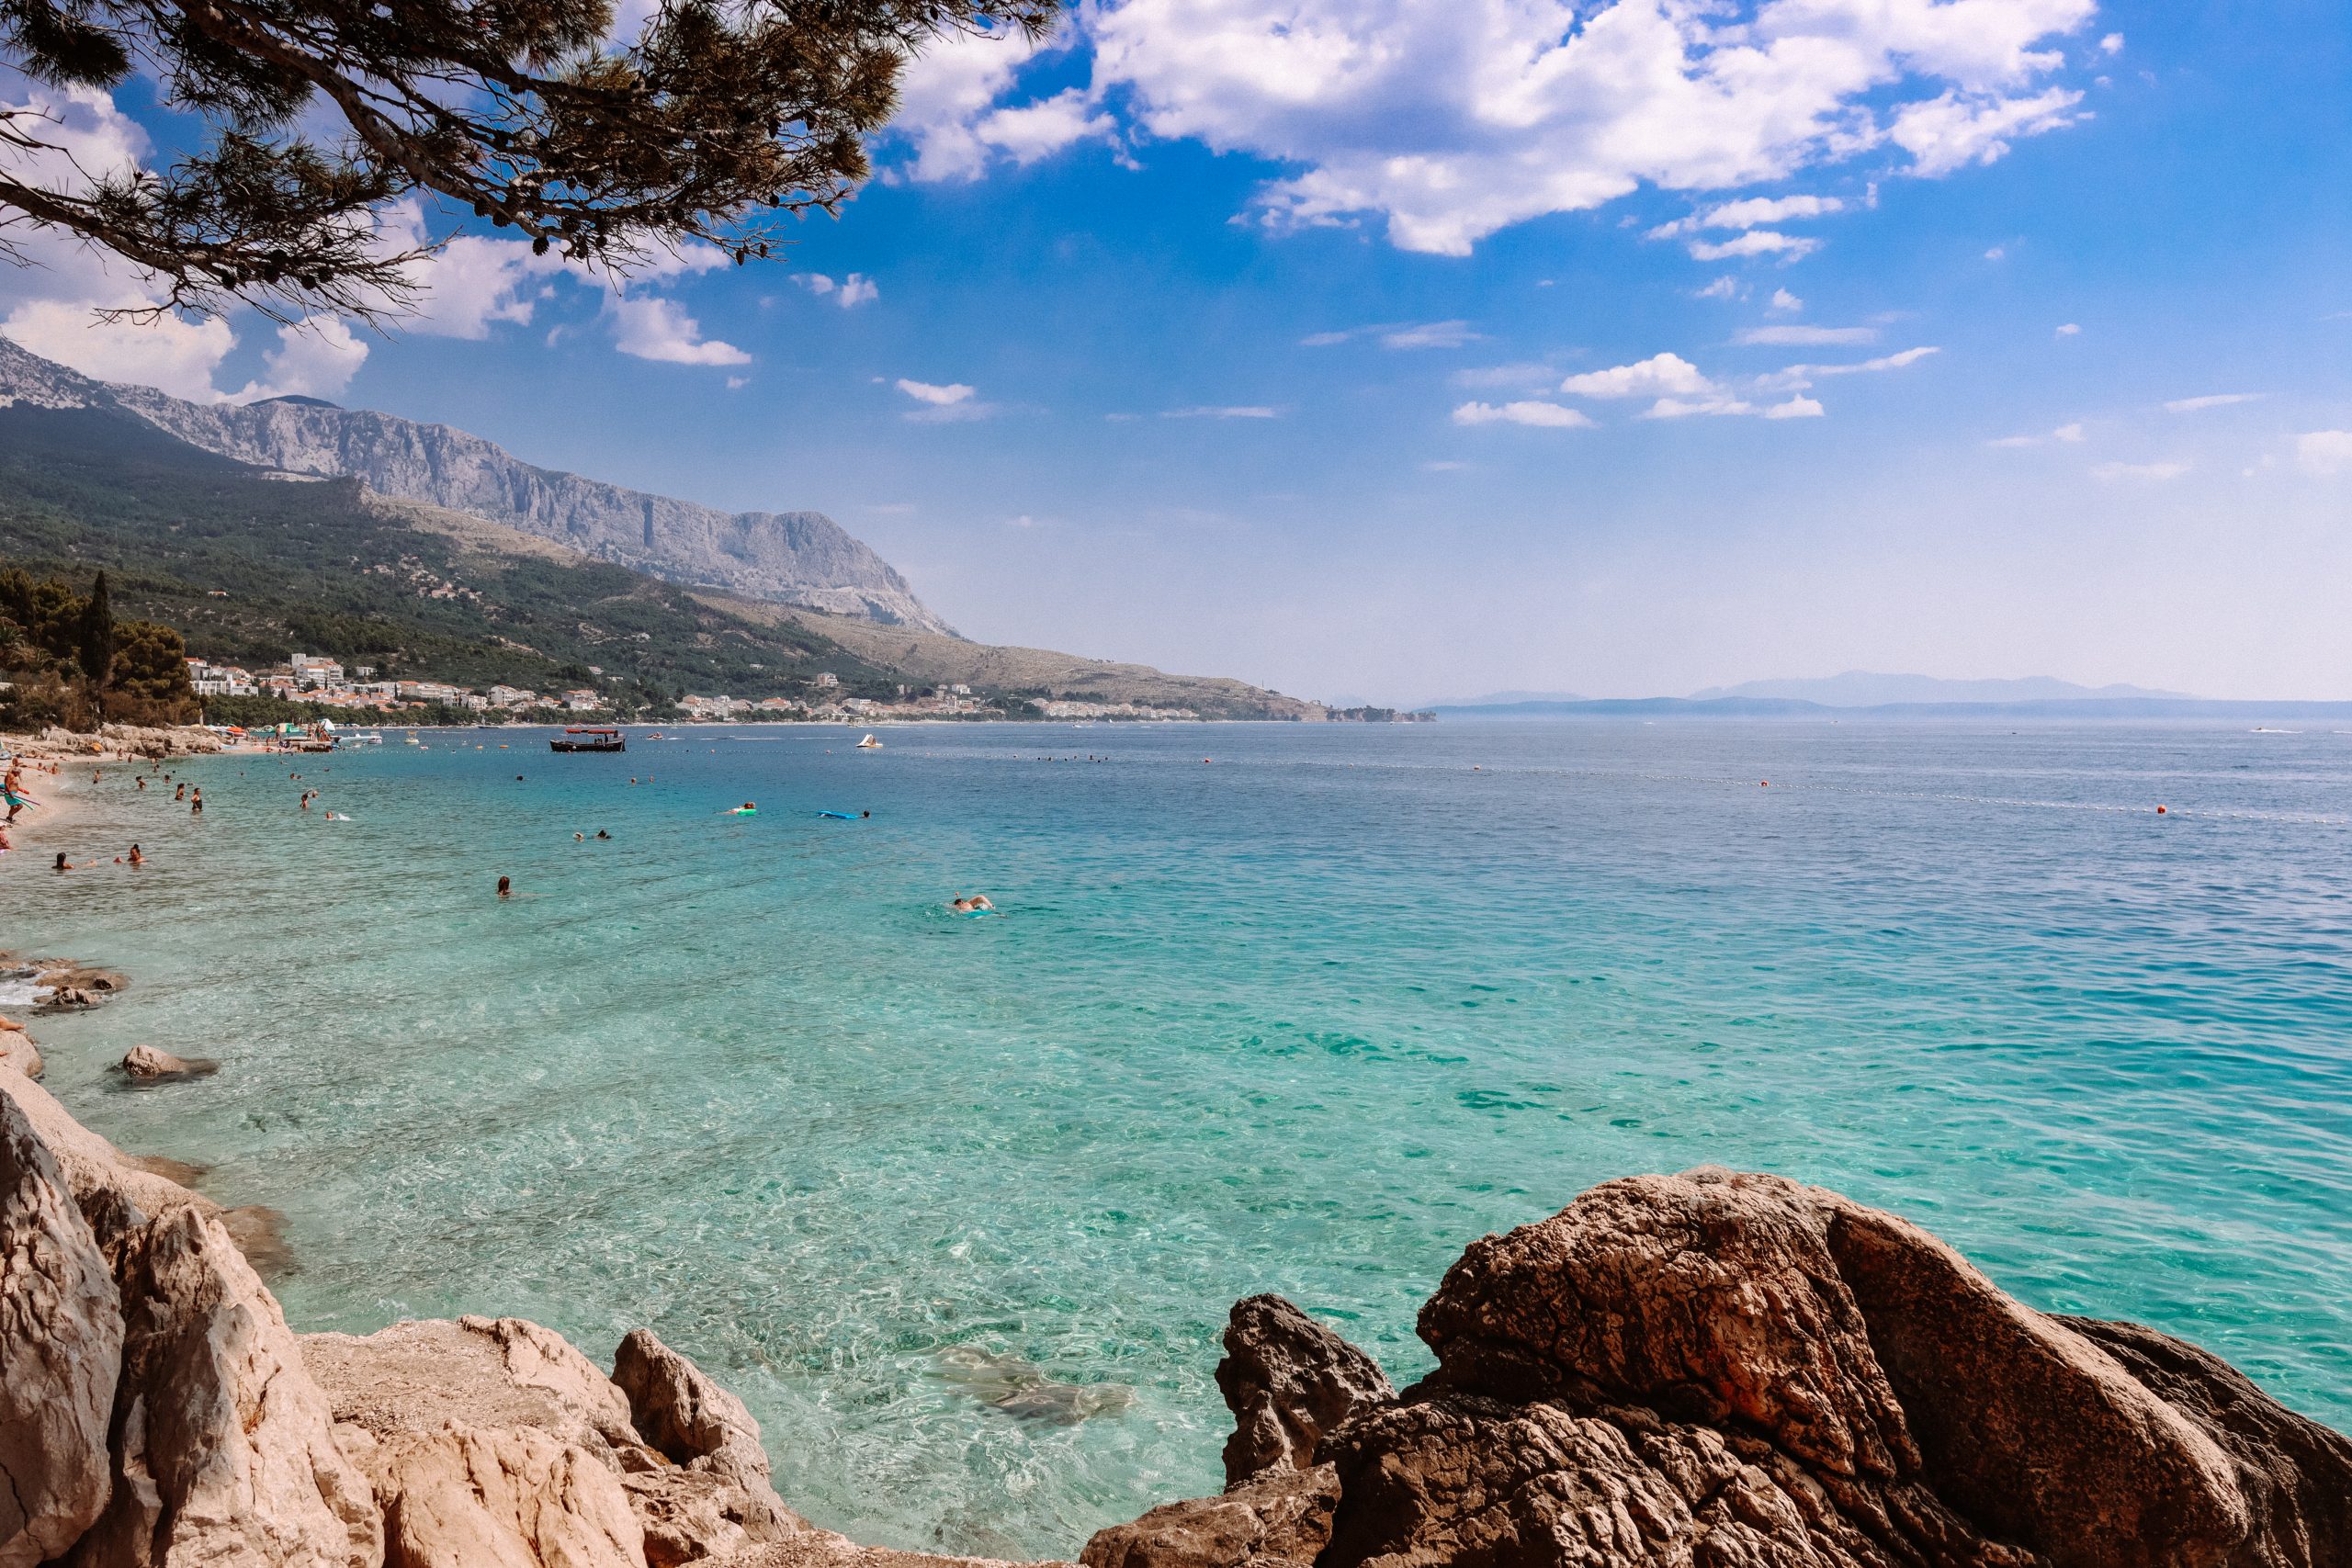 Turquoise waters and rocks with pine trees in the Croatian Riviera. Things to see in Makarska.